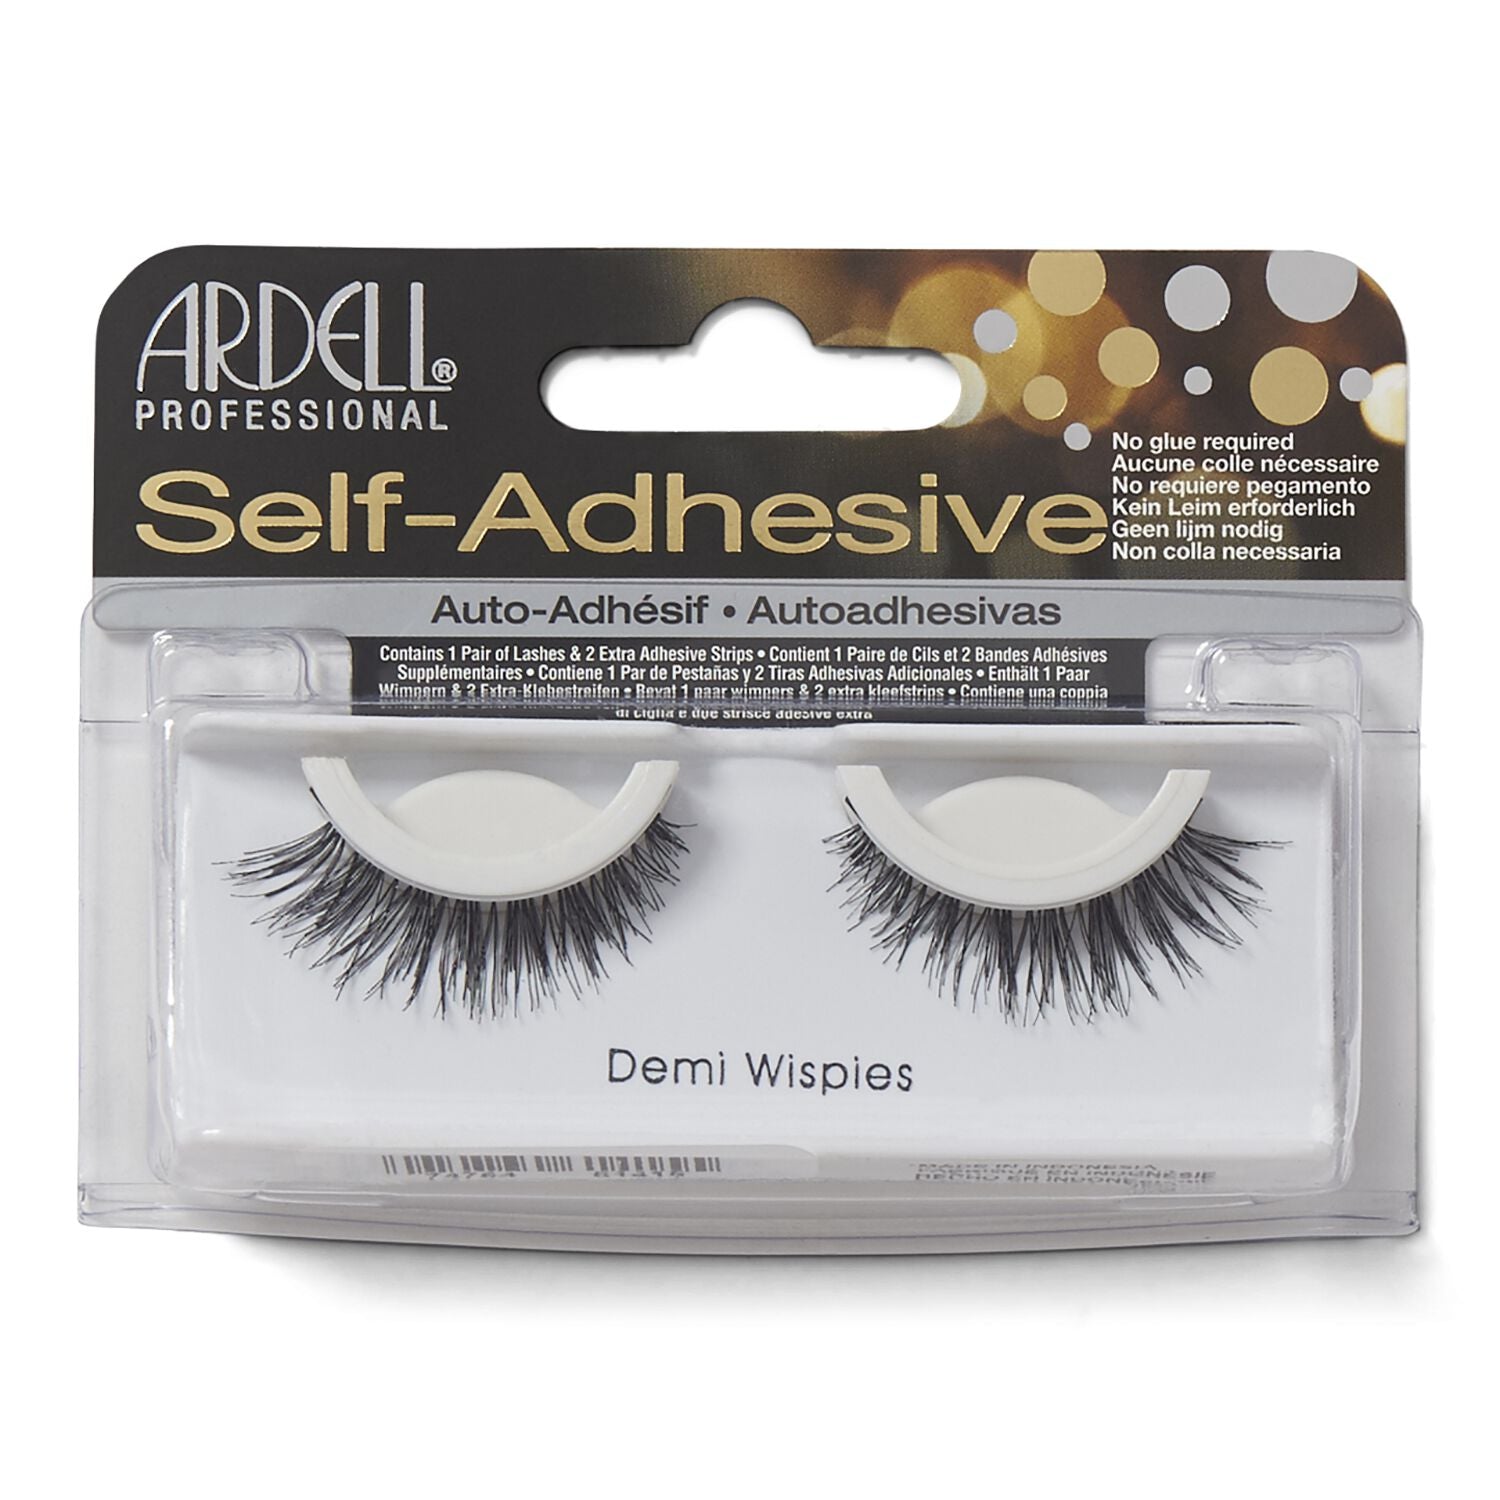 Wispies  by   Ardell Self Adhesive Demi Wispies Lashes